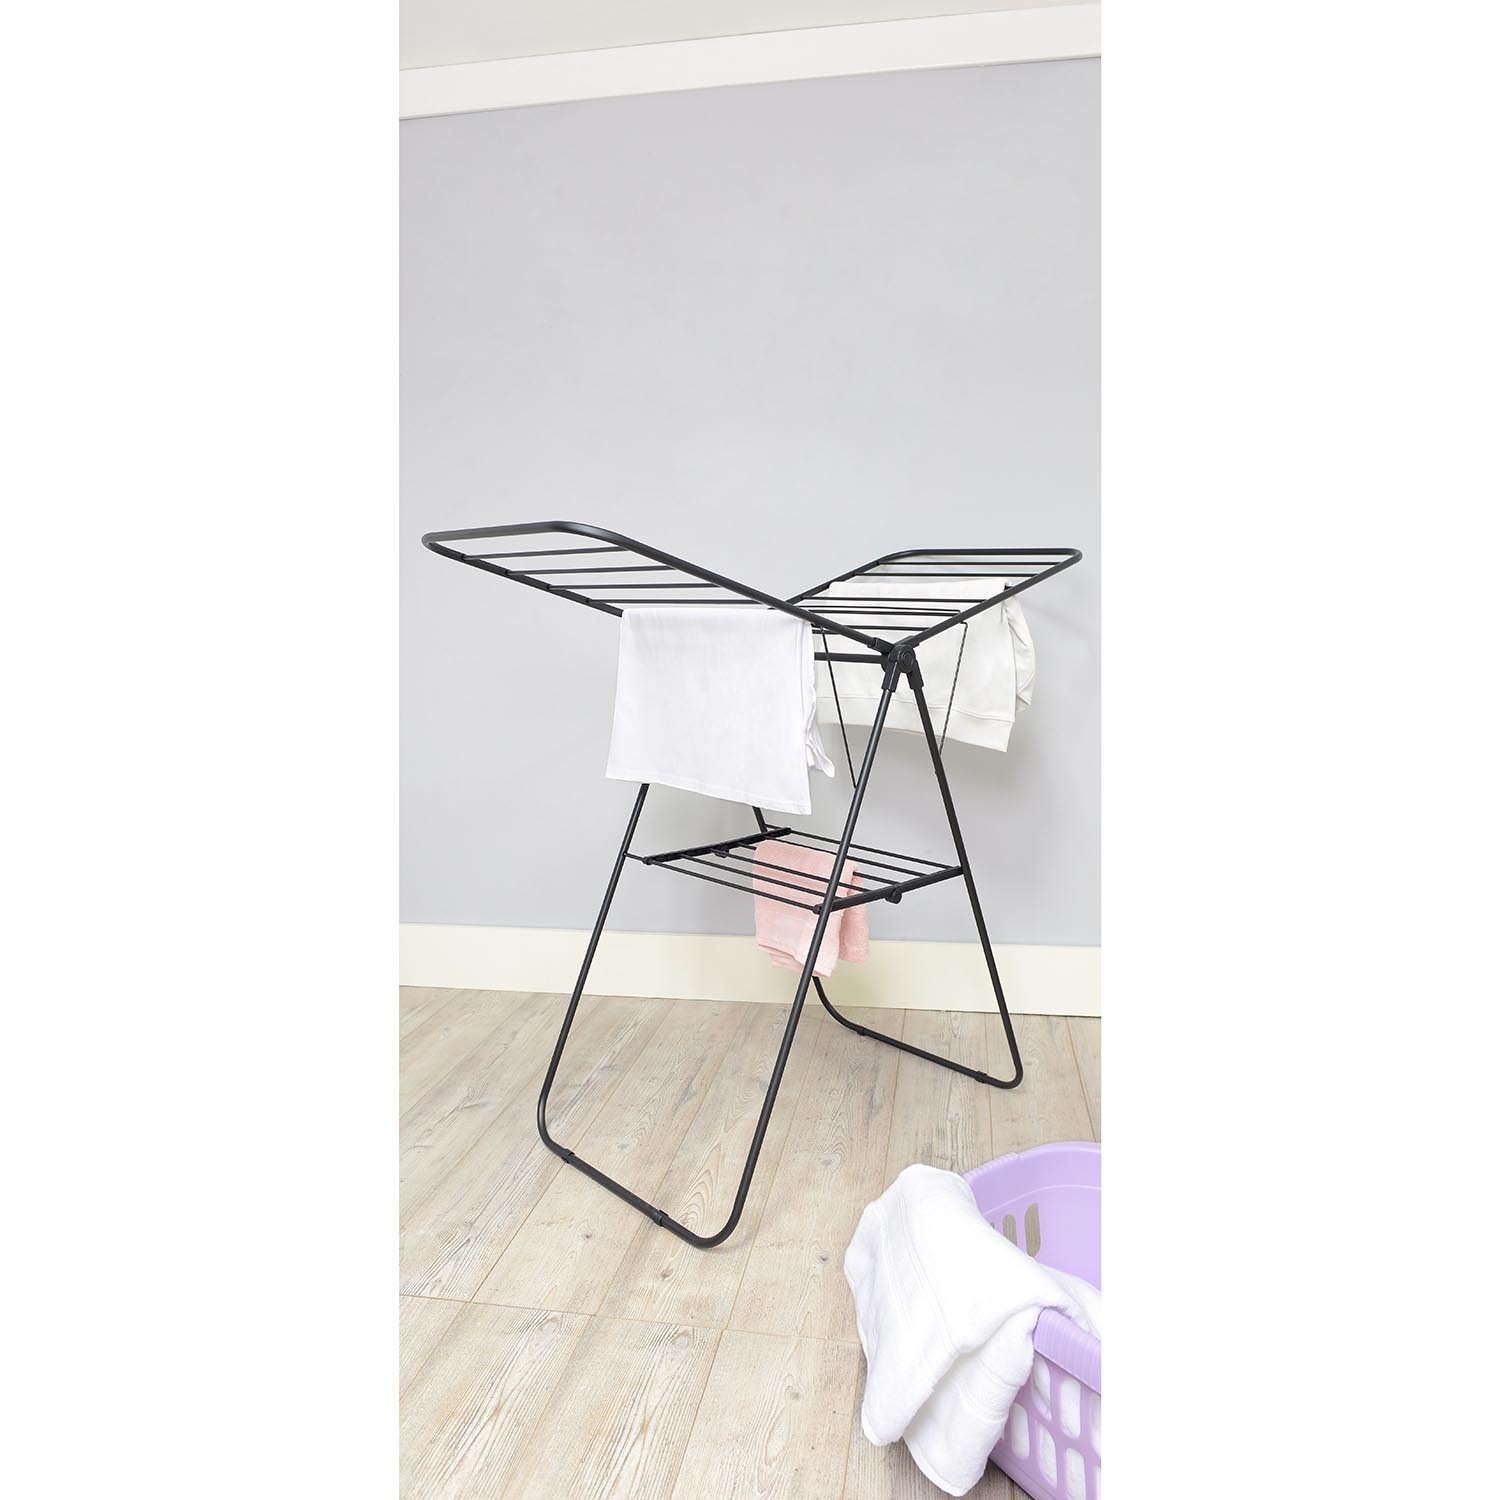 Indoor Large Black X Wing Airer 96 x 137cm Image 2